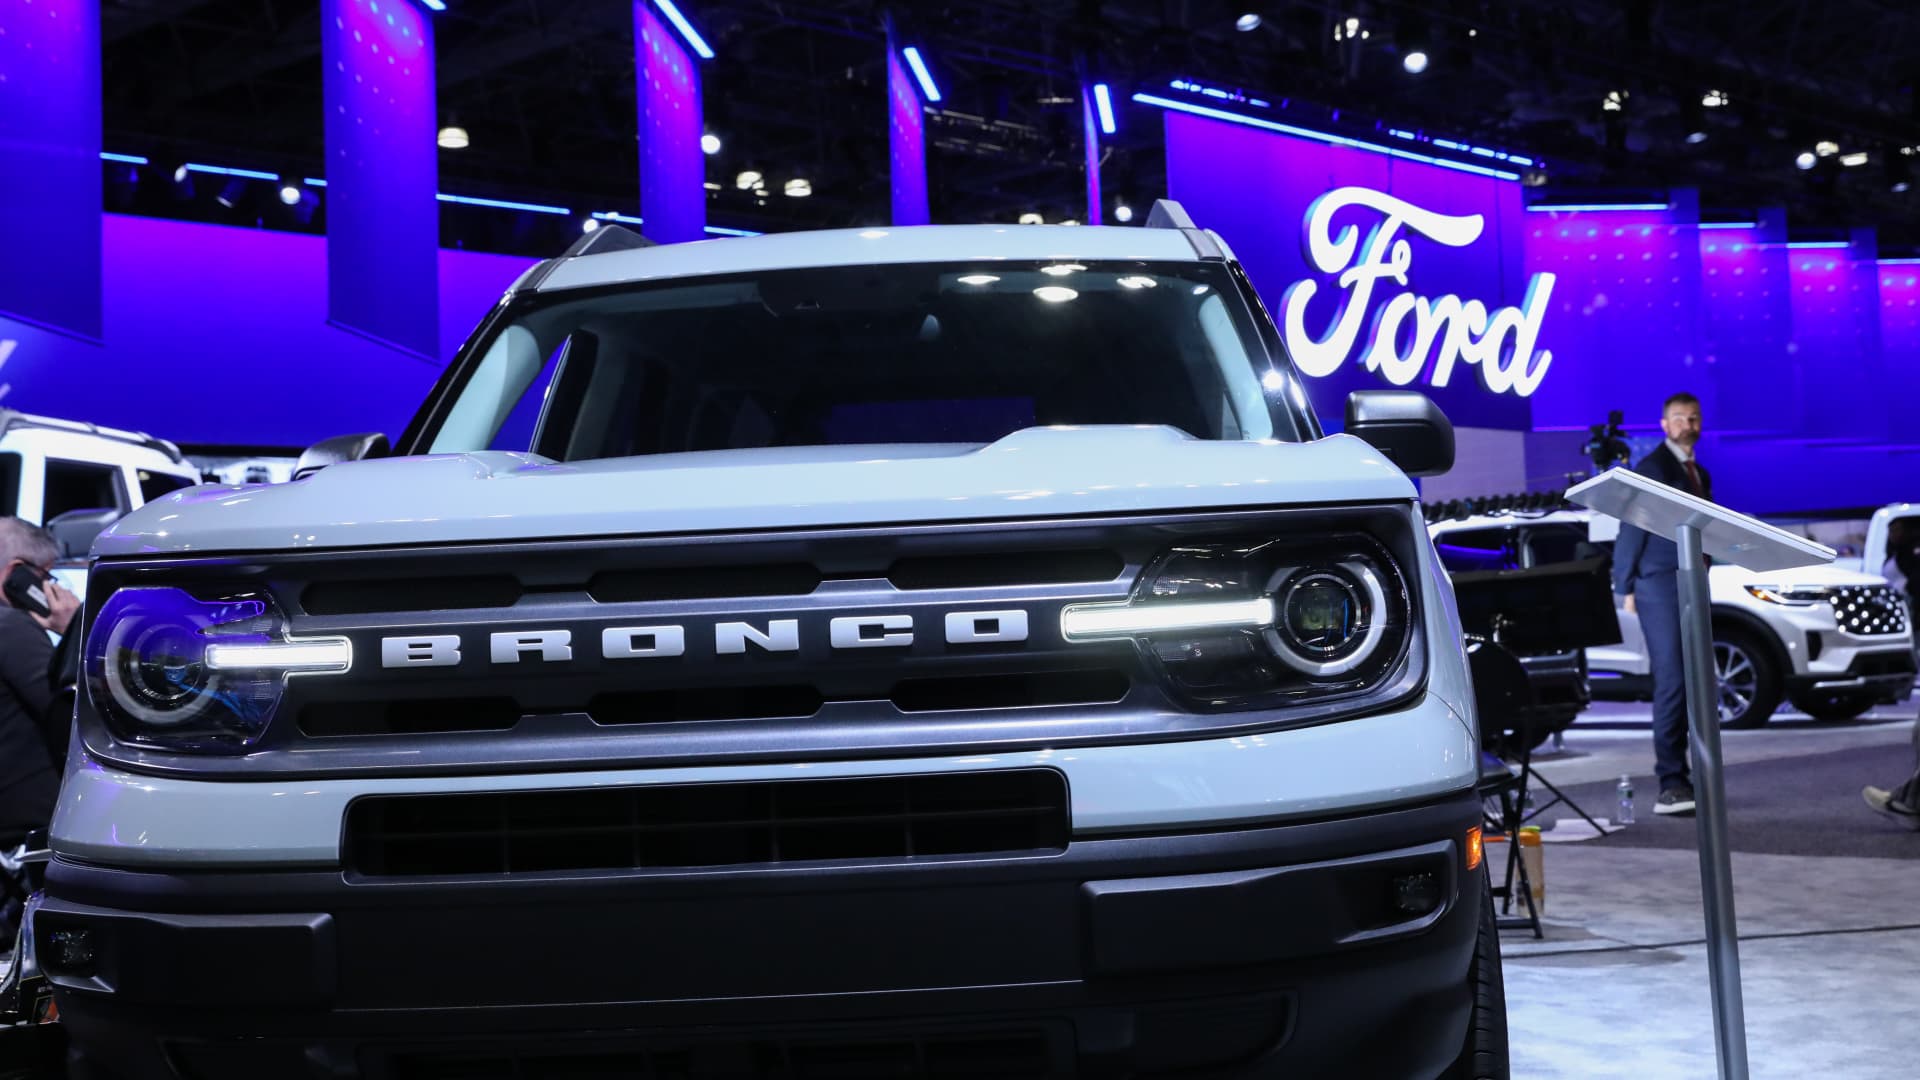 Ford shares, on pace for worst day since 2009, lead autos rout after disappointing earnings